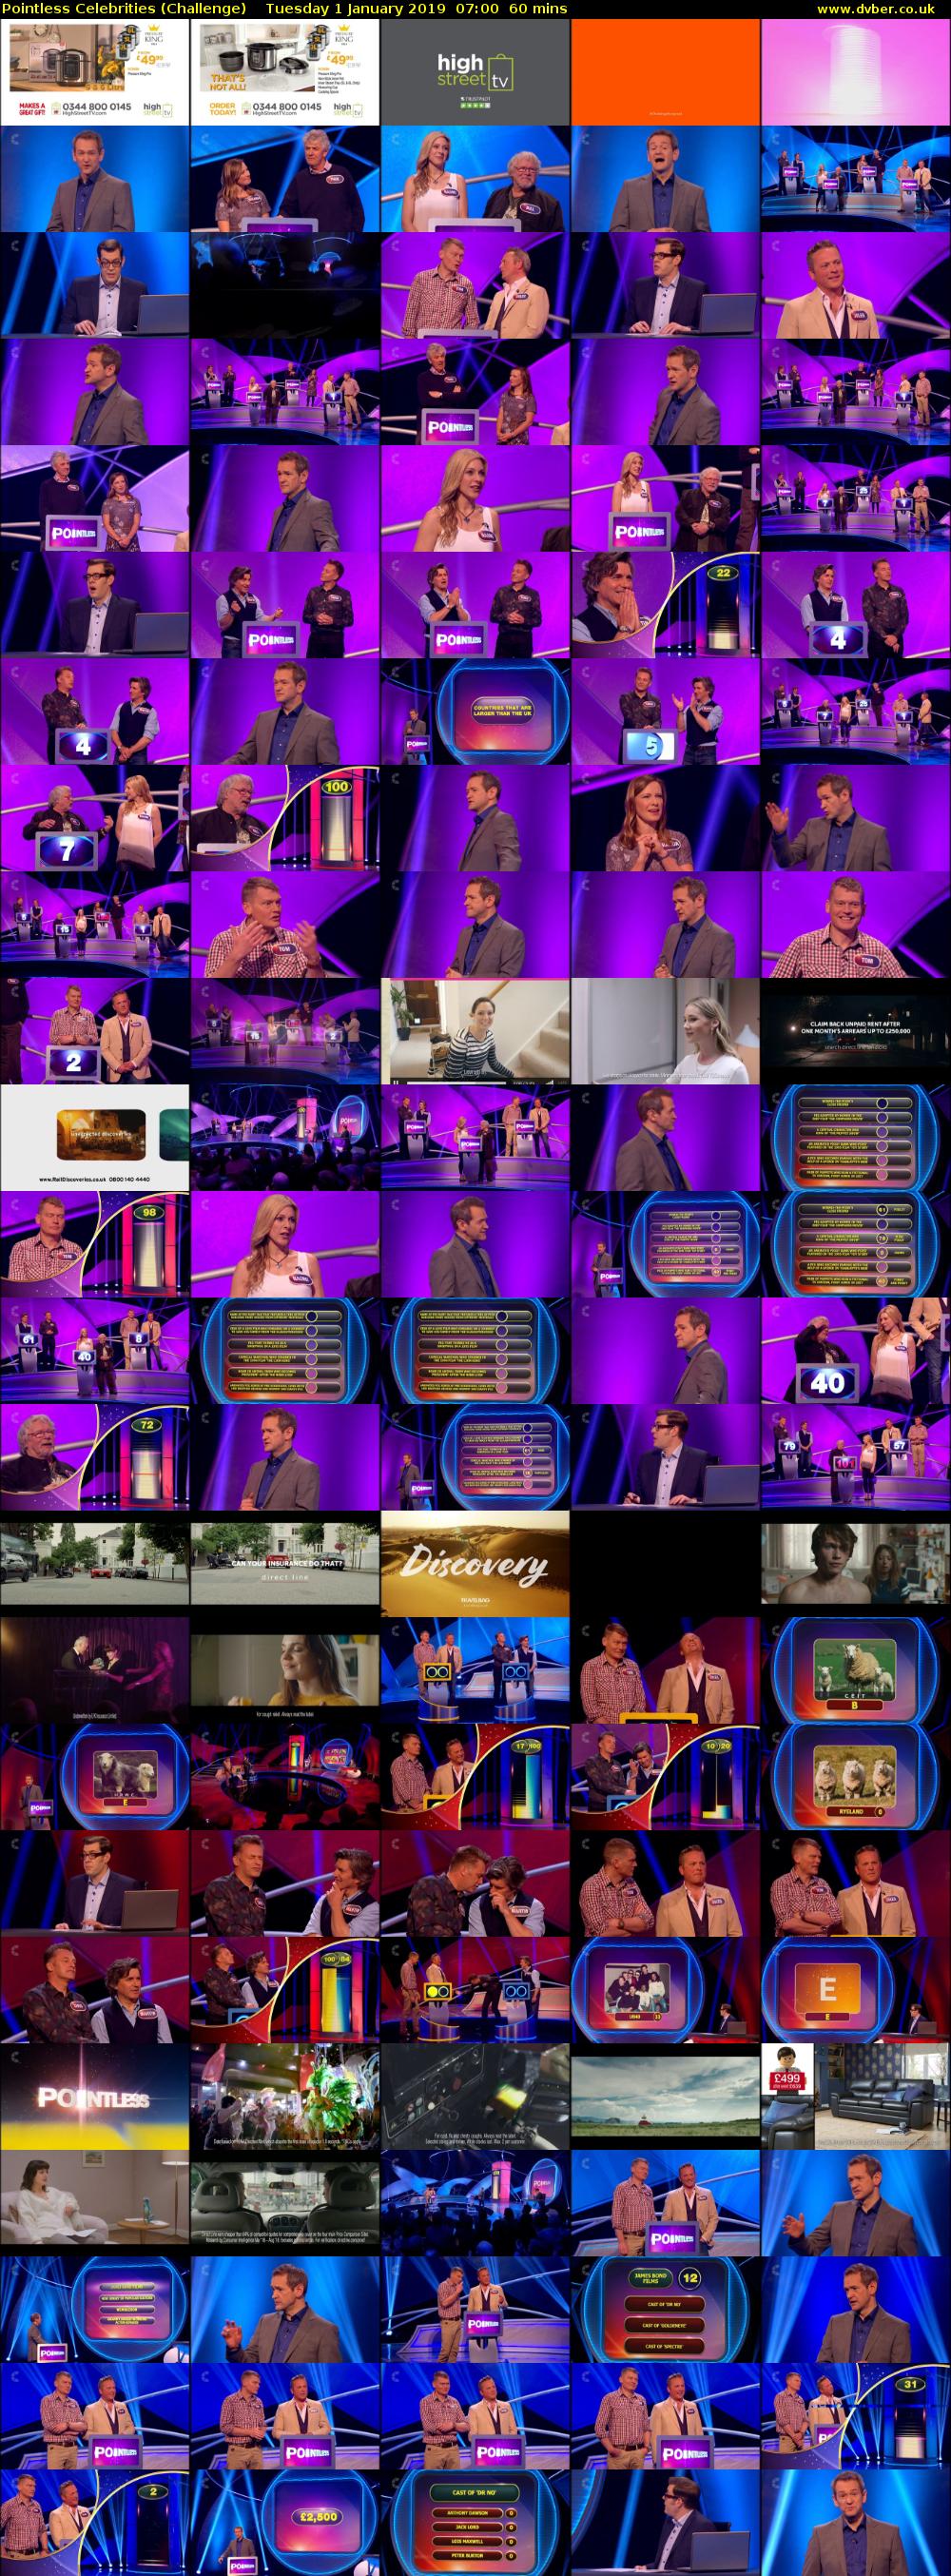 Pointless Celebrities (Challenge) Tuesday 1 January 2019 07:00 - 08:00